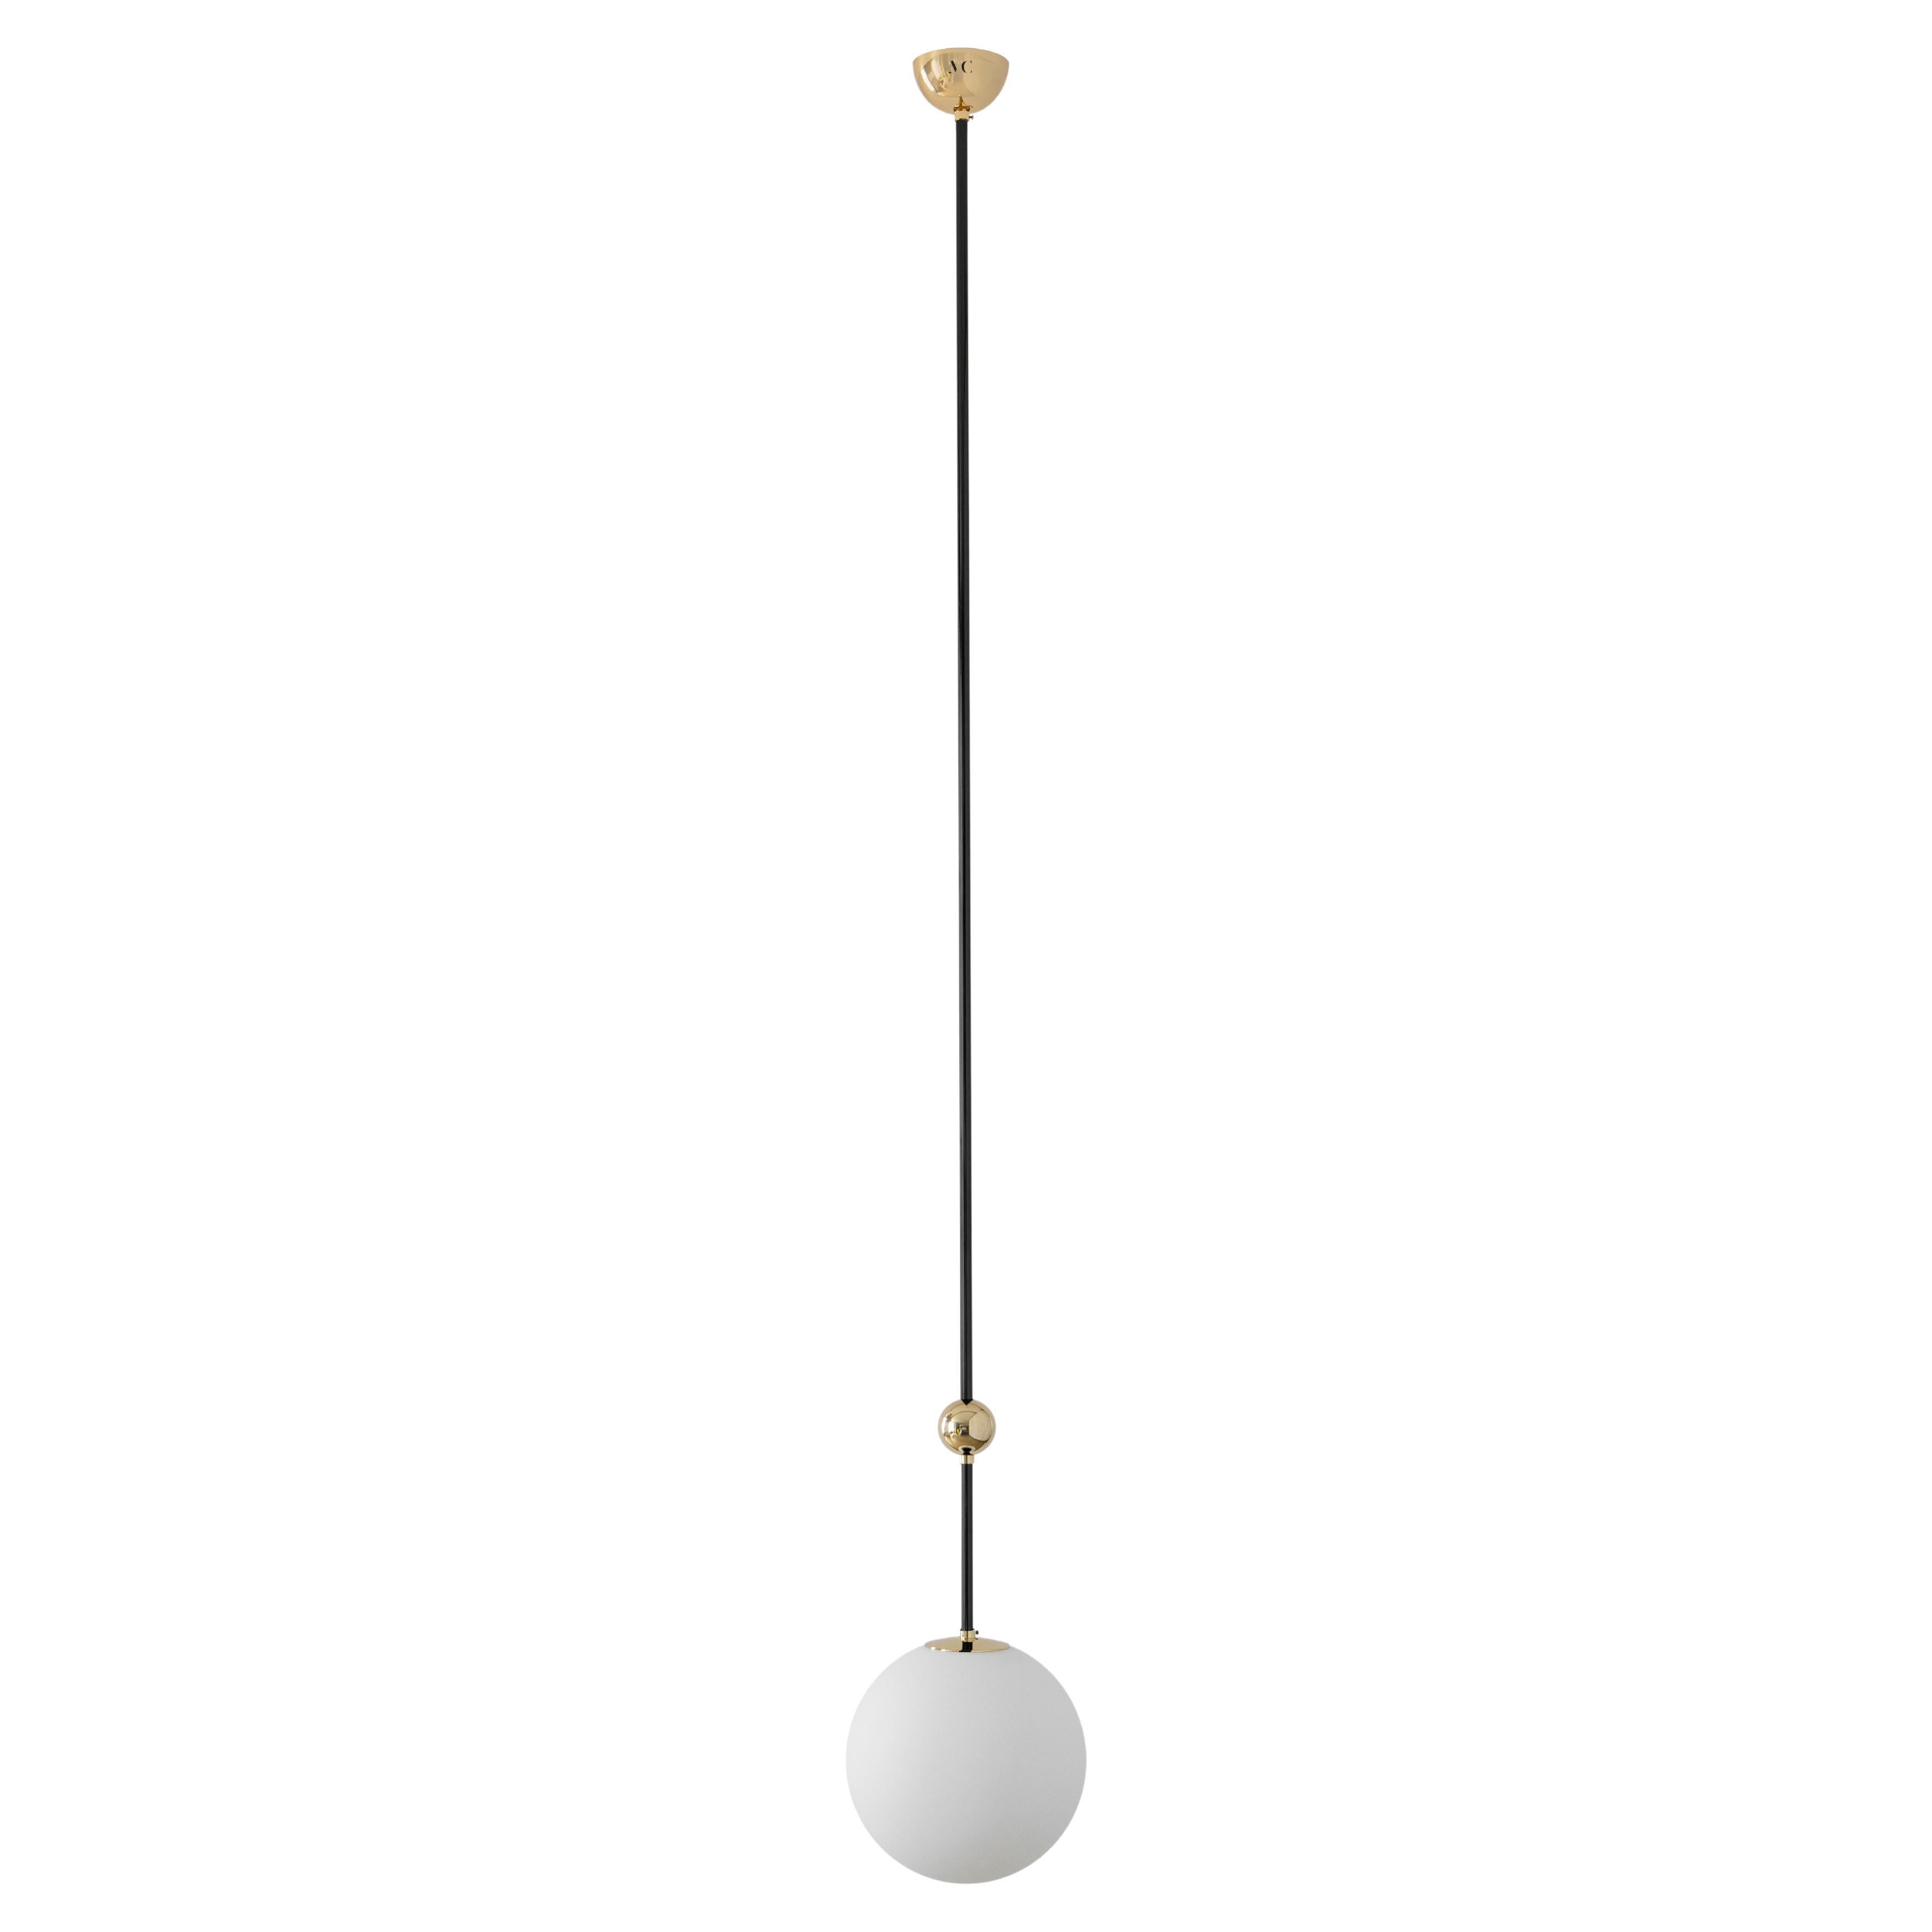 Pendant 02 by Magic Circus Editions.
Dimensions: D 25 x W 25 x H 190 cm, also available in H 110, 130, 150, 175 cm.
Materials: brass, mouth blown glass

All our lamps can be wired according to each country. If sold to the USA it will be wired